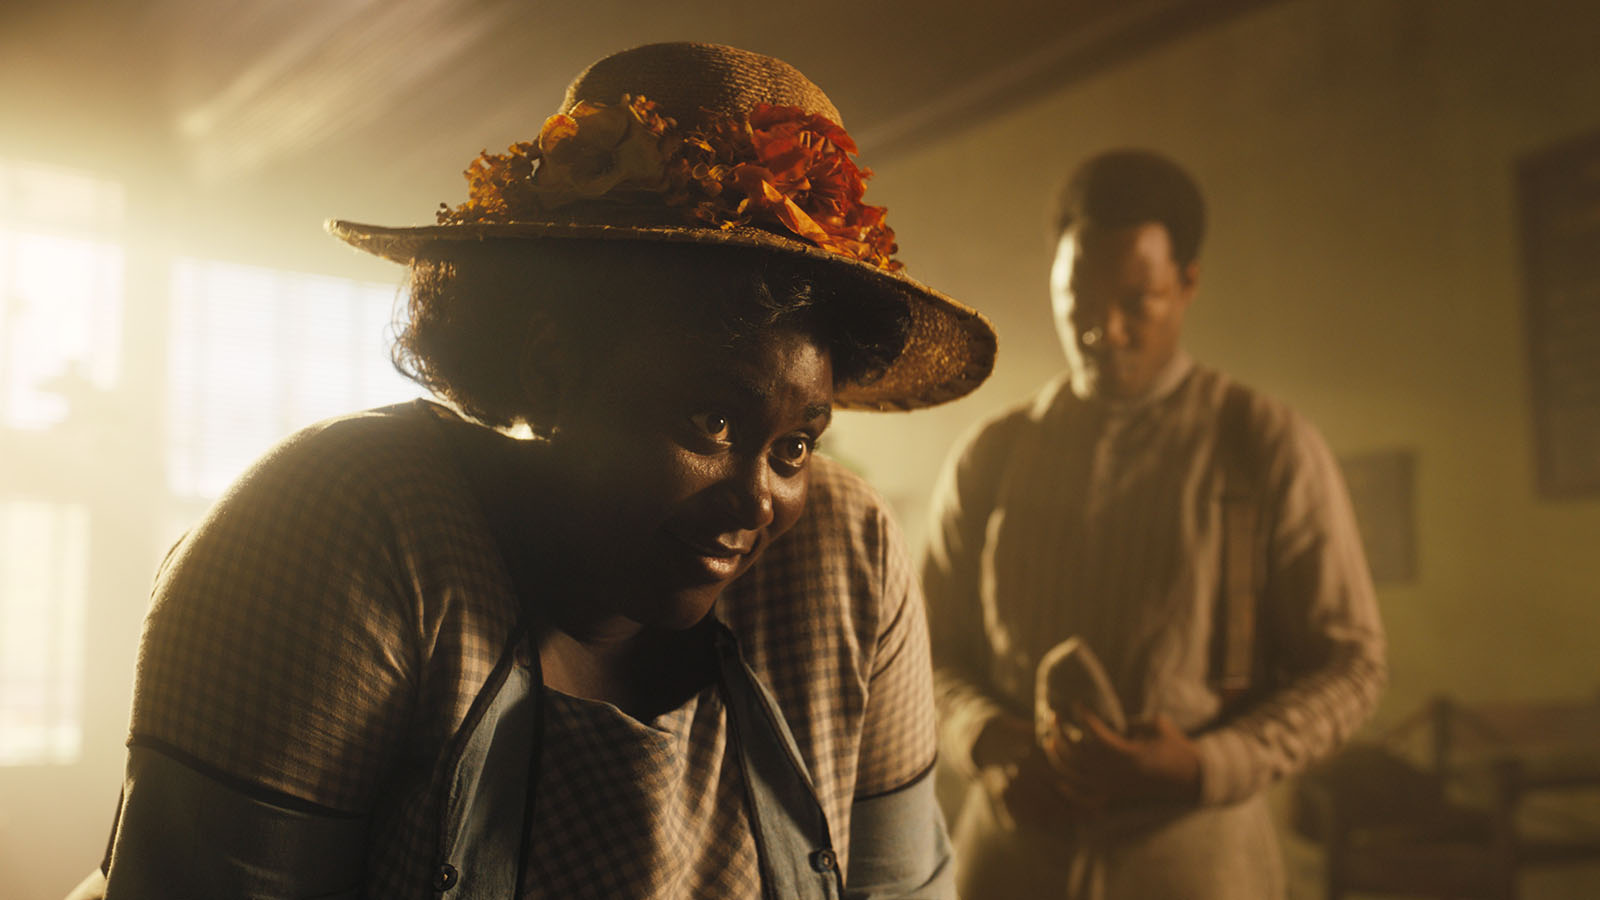 Sophia encourages Celie to stand up for herself. Image © Warner Bros. Pictures